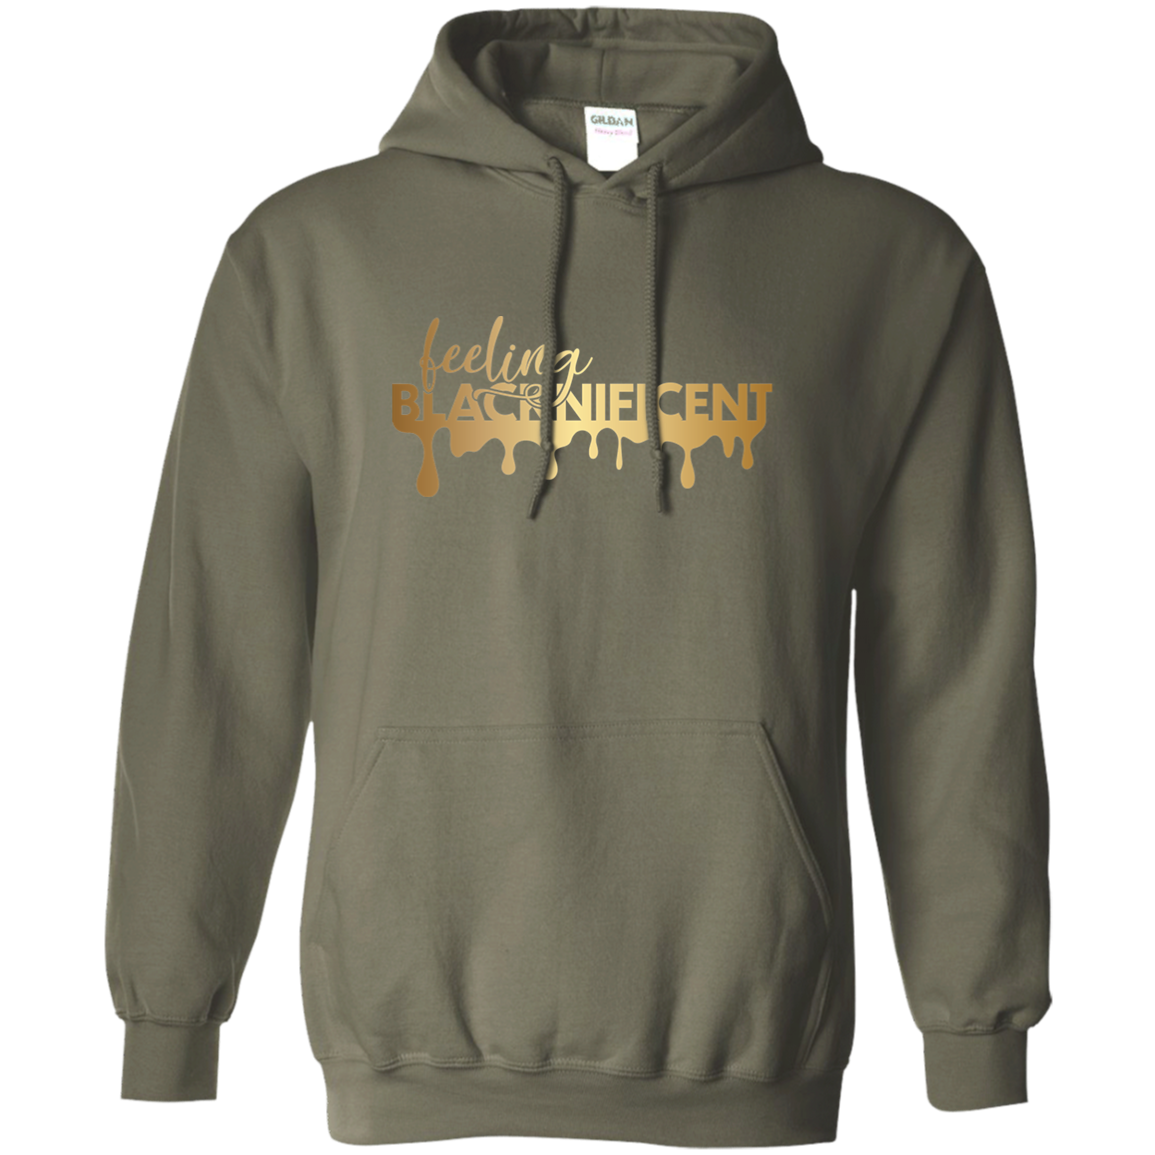 Blacknificent Pullover Hoodie